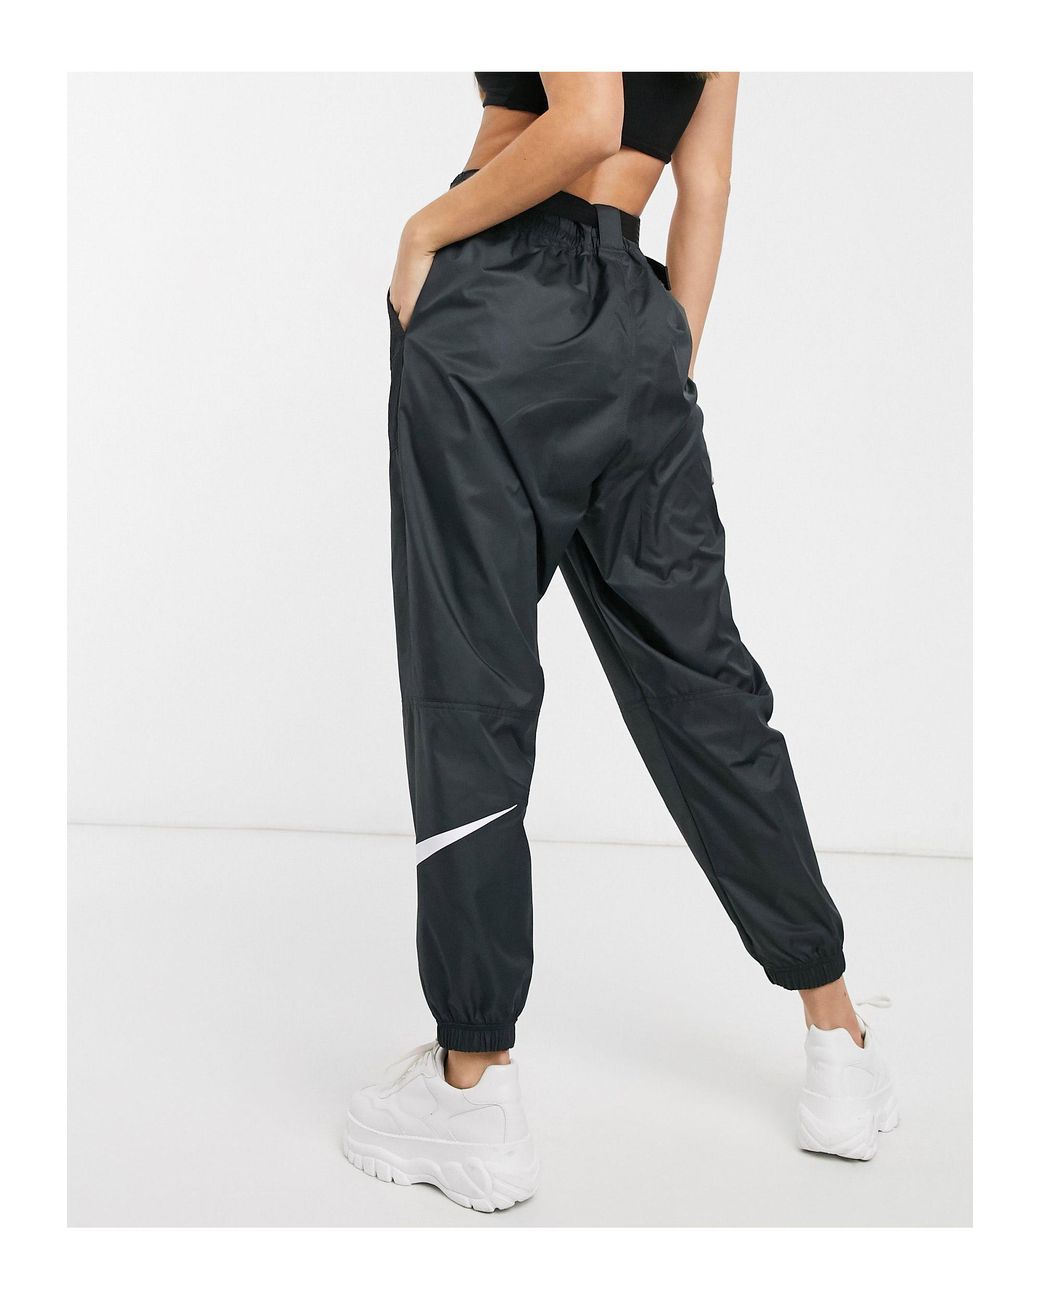 Nike Synthetic Woven Swoosh Pant in Black/White (Black) | Lyst